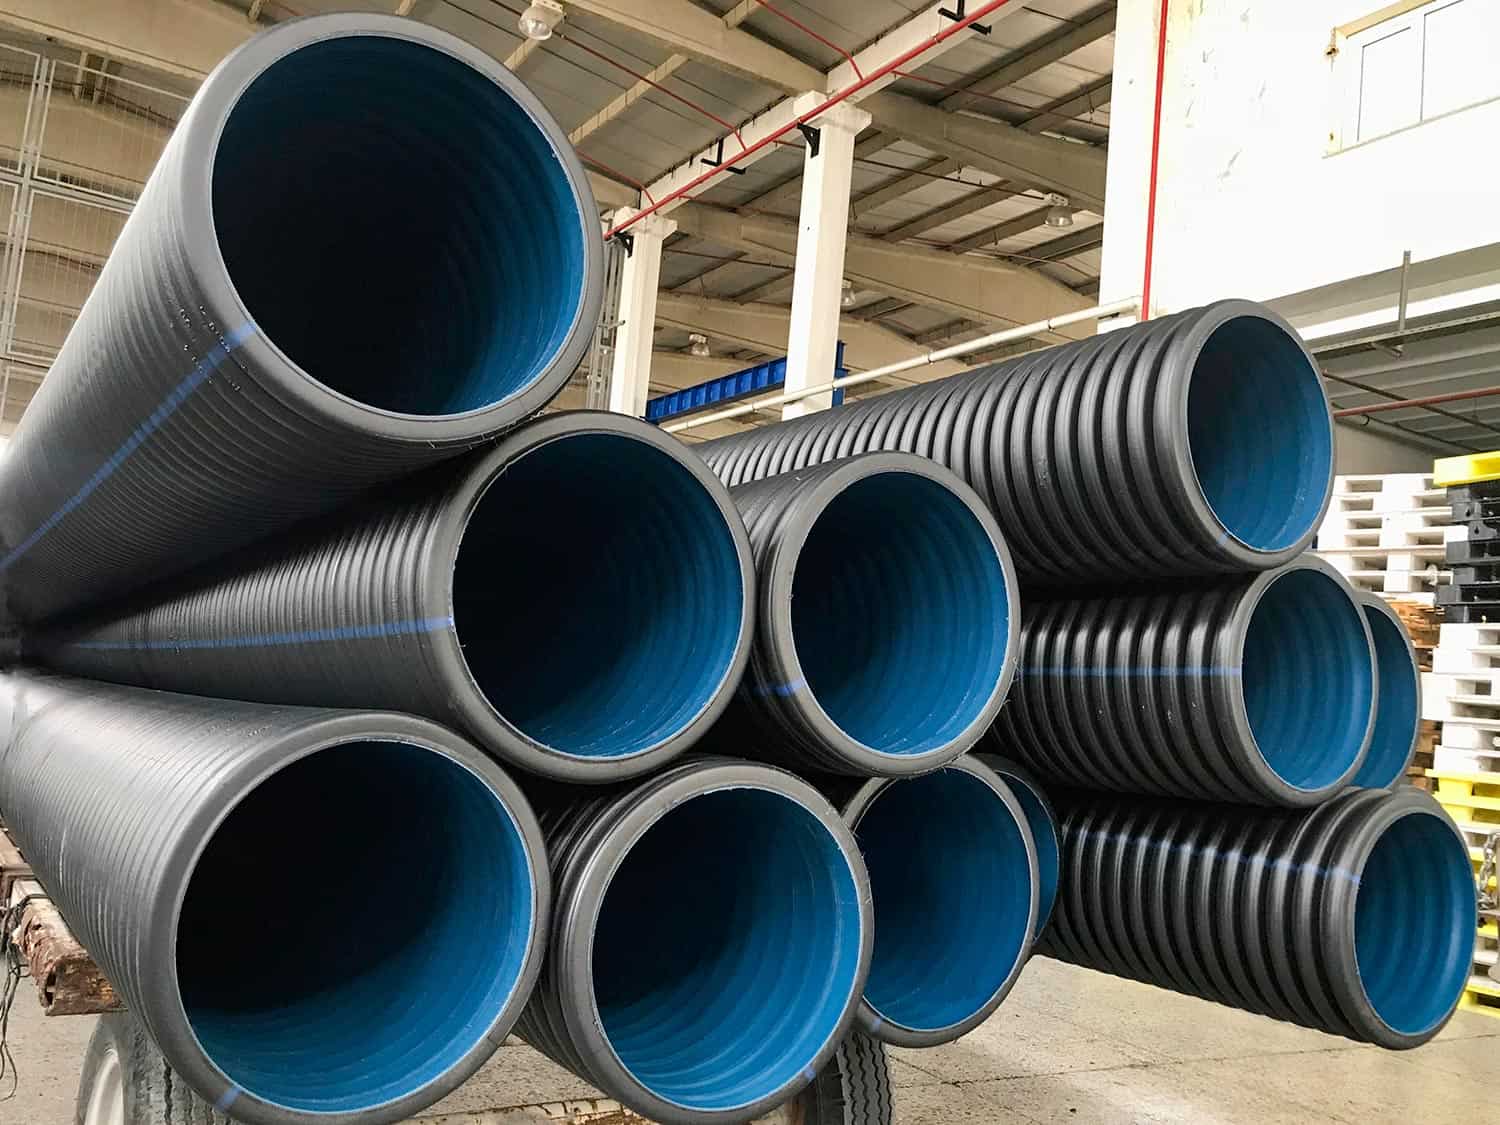 Corrugated pipes for wastewater